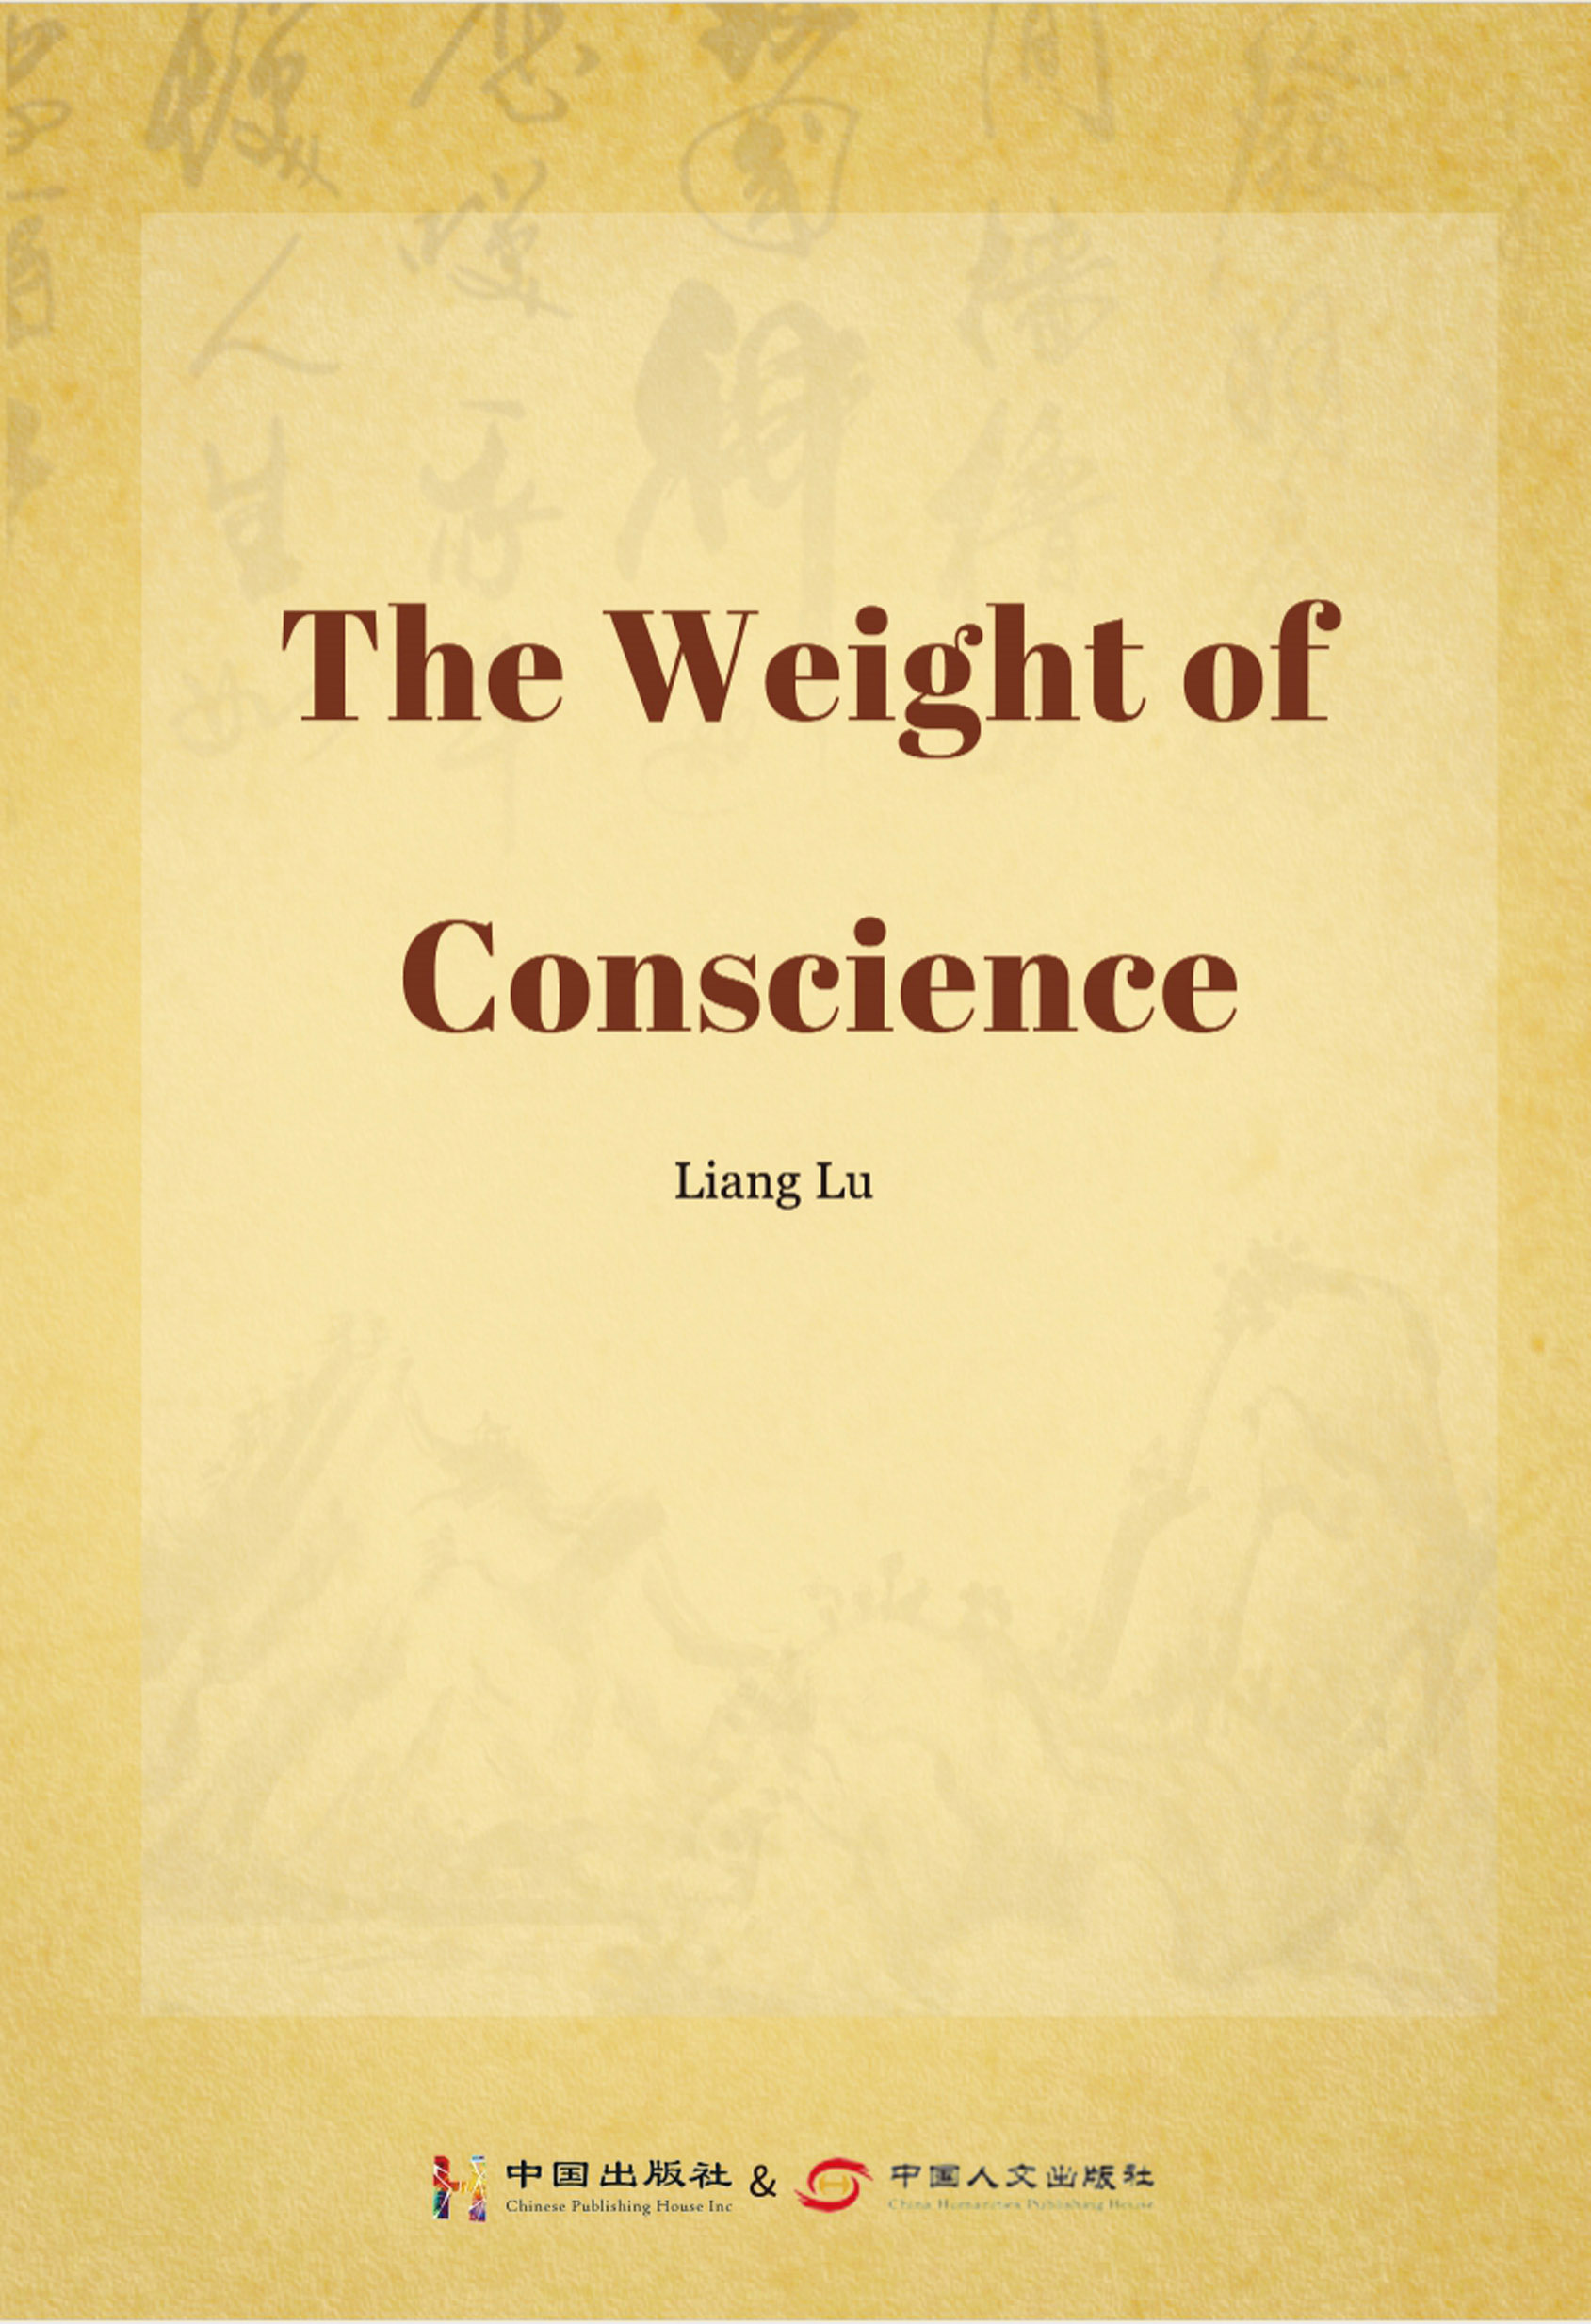 The Weight of Conscience